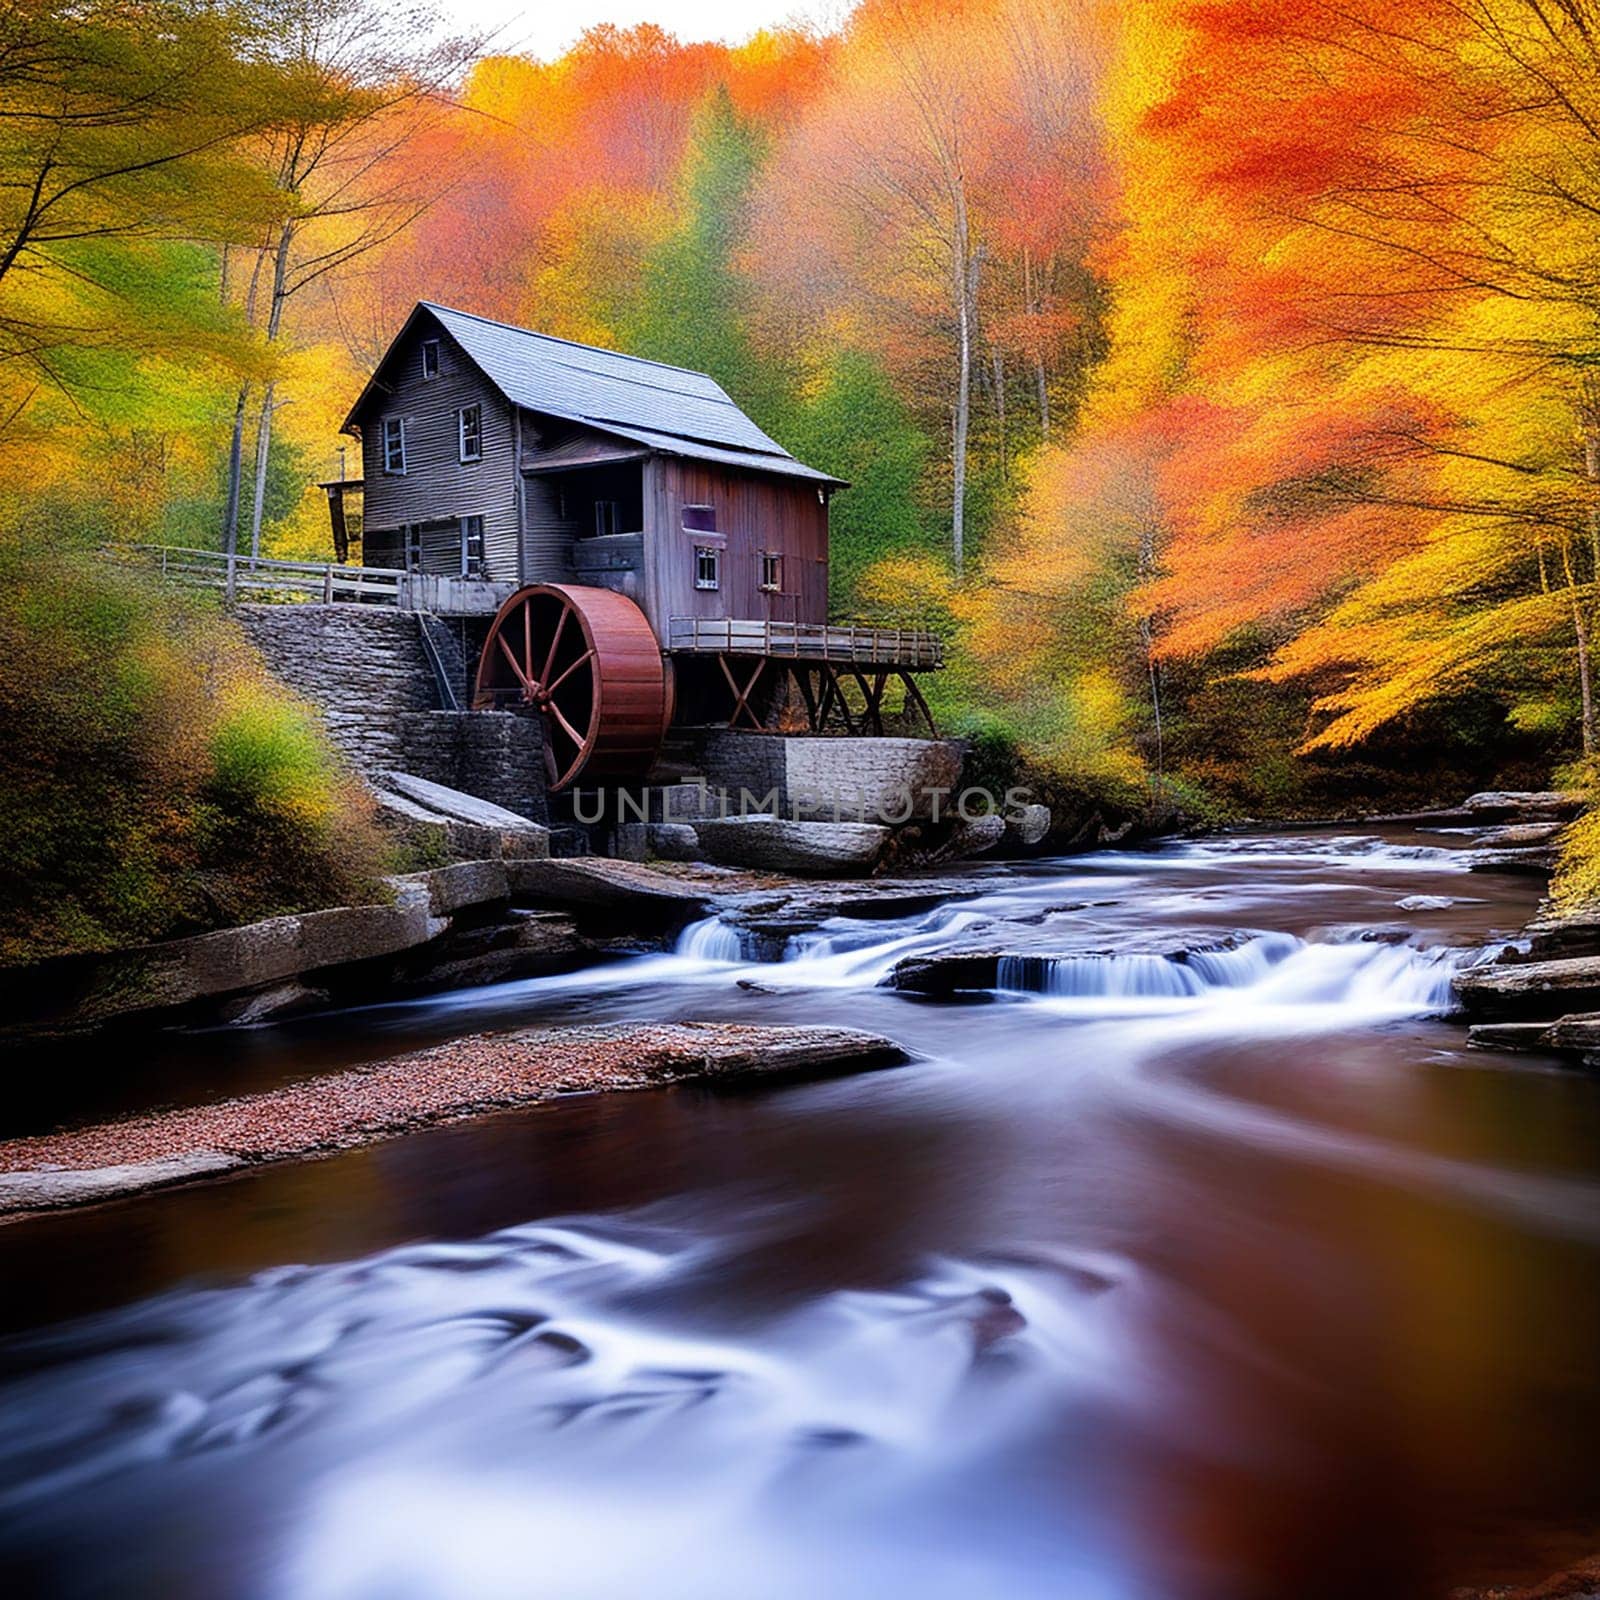 Autumn Splendor: Glade Creek Grist Mill Amidst Colorful October Foliage in West Virginia's Popular Fall Destination by Petrichor